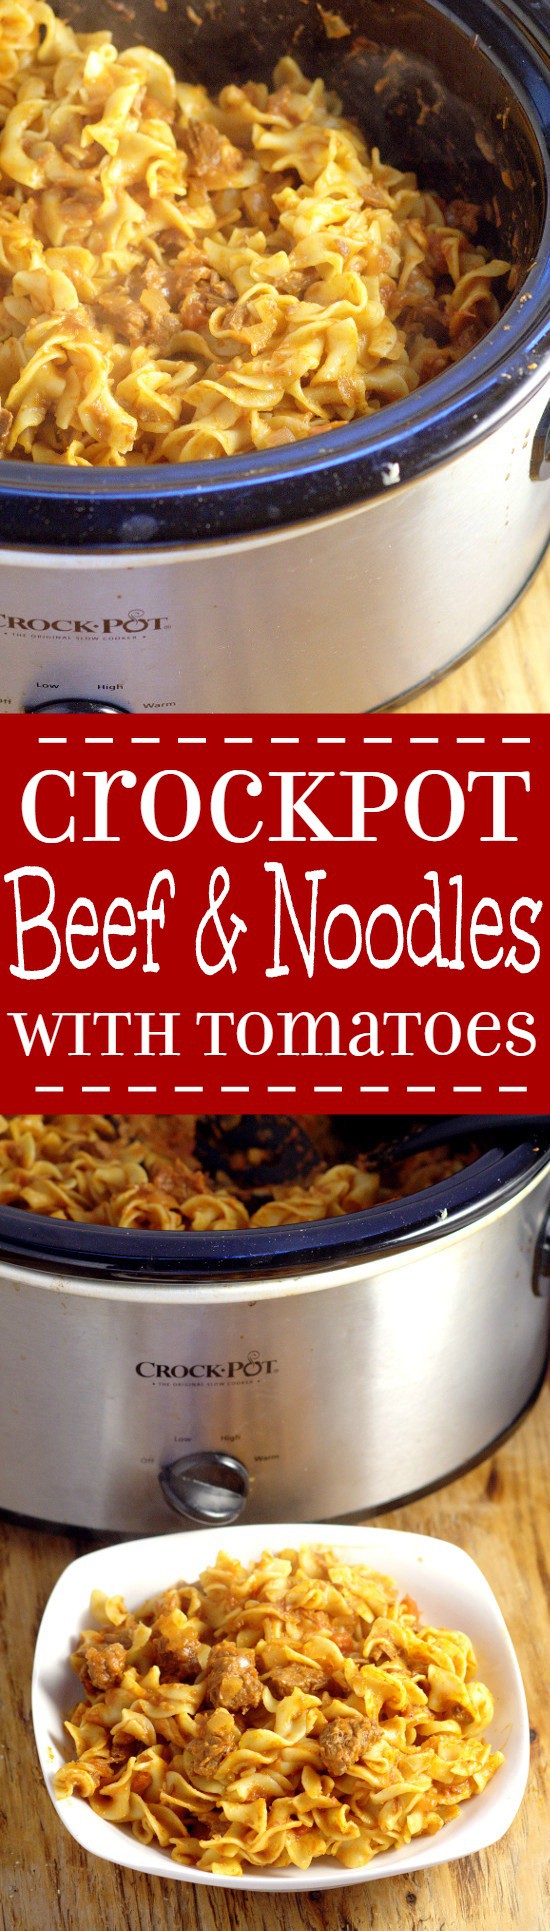 Crockpot Beef and Noodles with Tomatoes recipe is a dinner time classic with juicy stew beef, zesty tomatoes, and comforting egg noodles, all in the slow cooker.  Perfect for a simple and easy family dinner recipe!